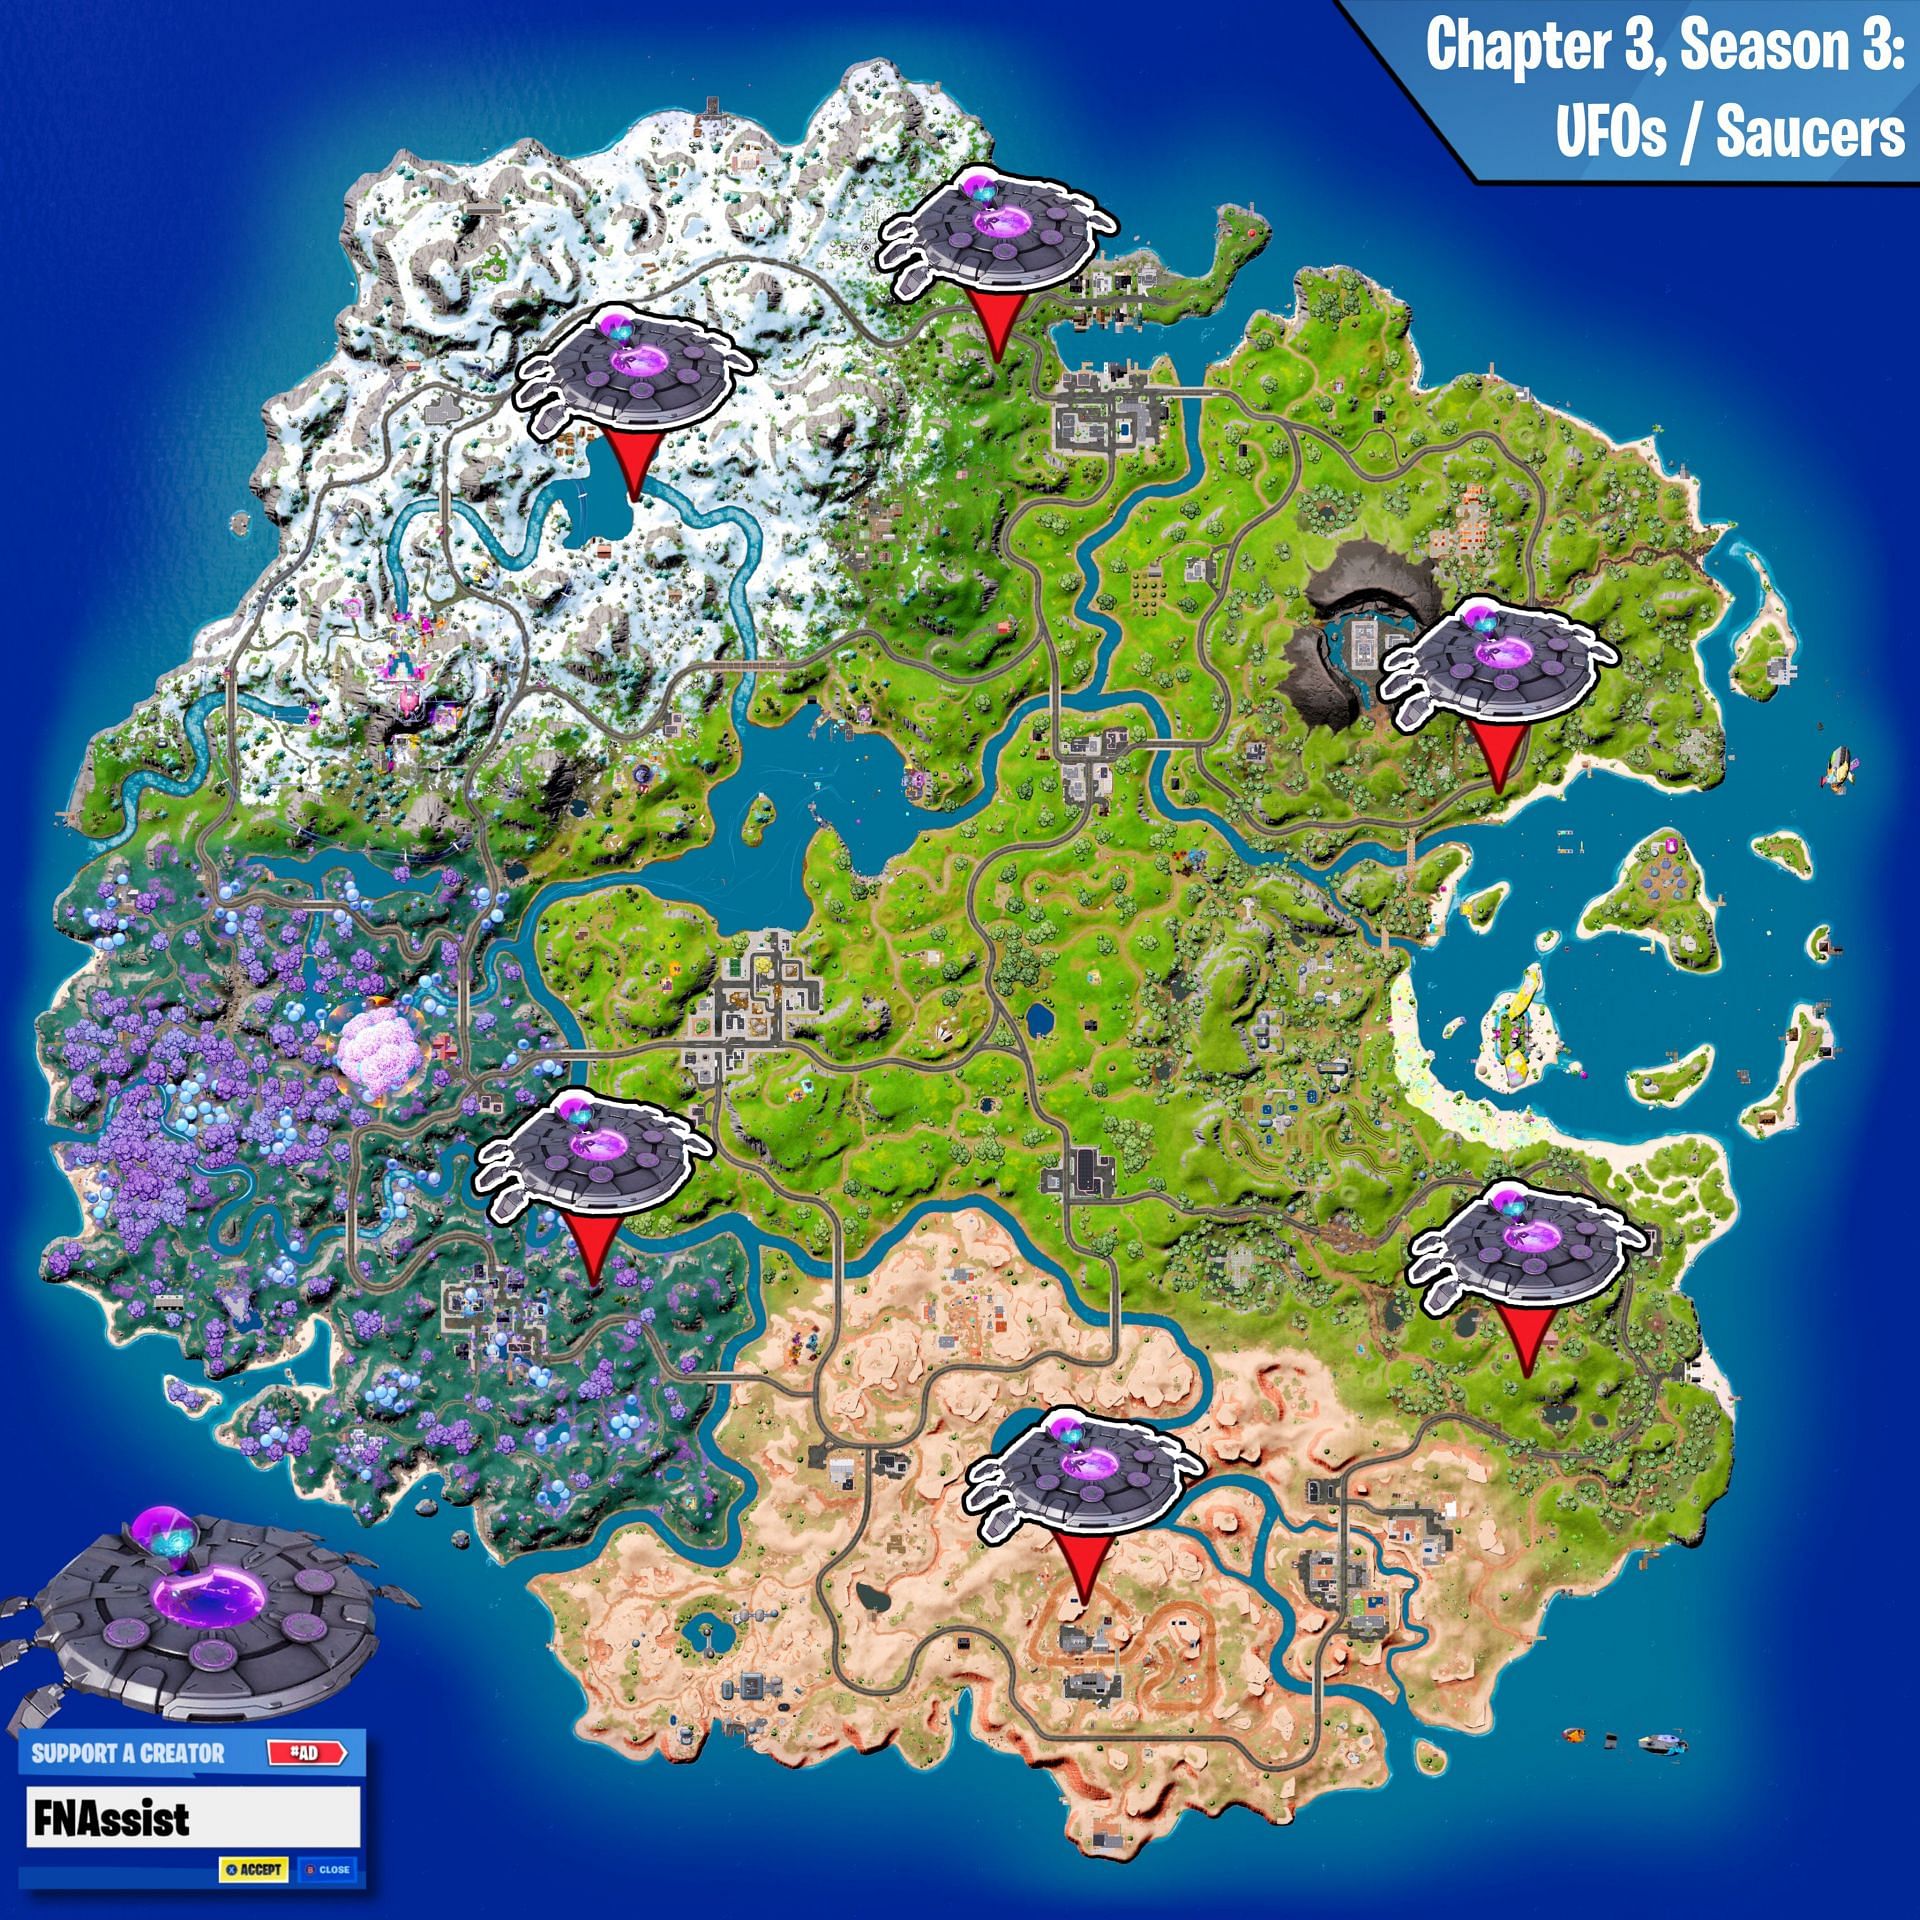 UFOs can be found in six different spots on the Chapter 3 Season 3 island (Image via FNAssist / Twitter)